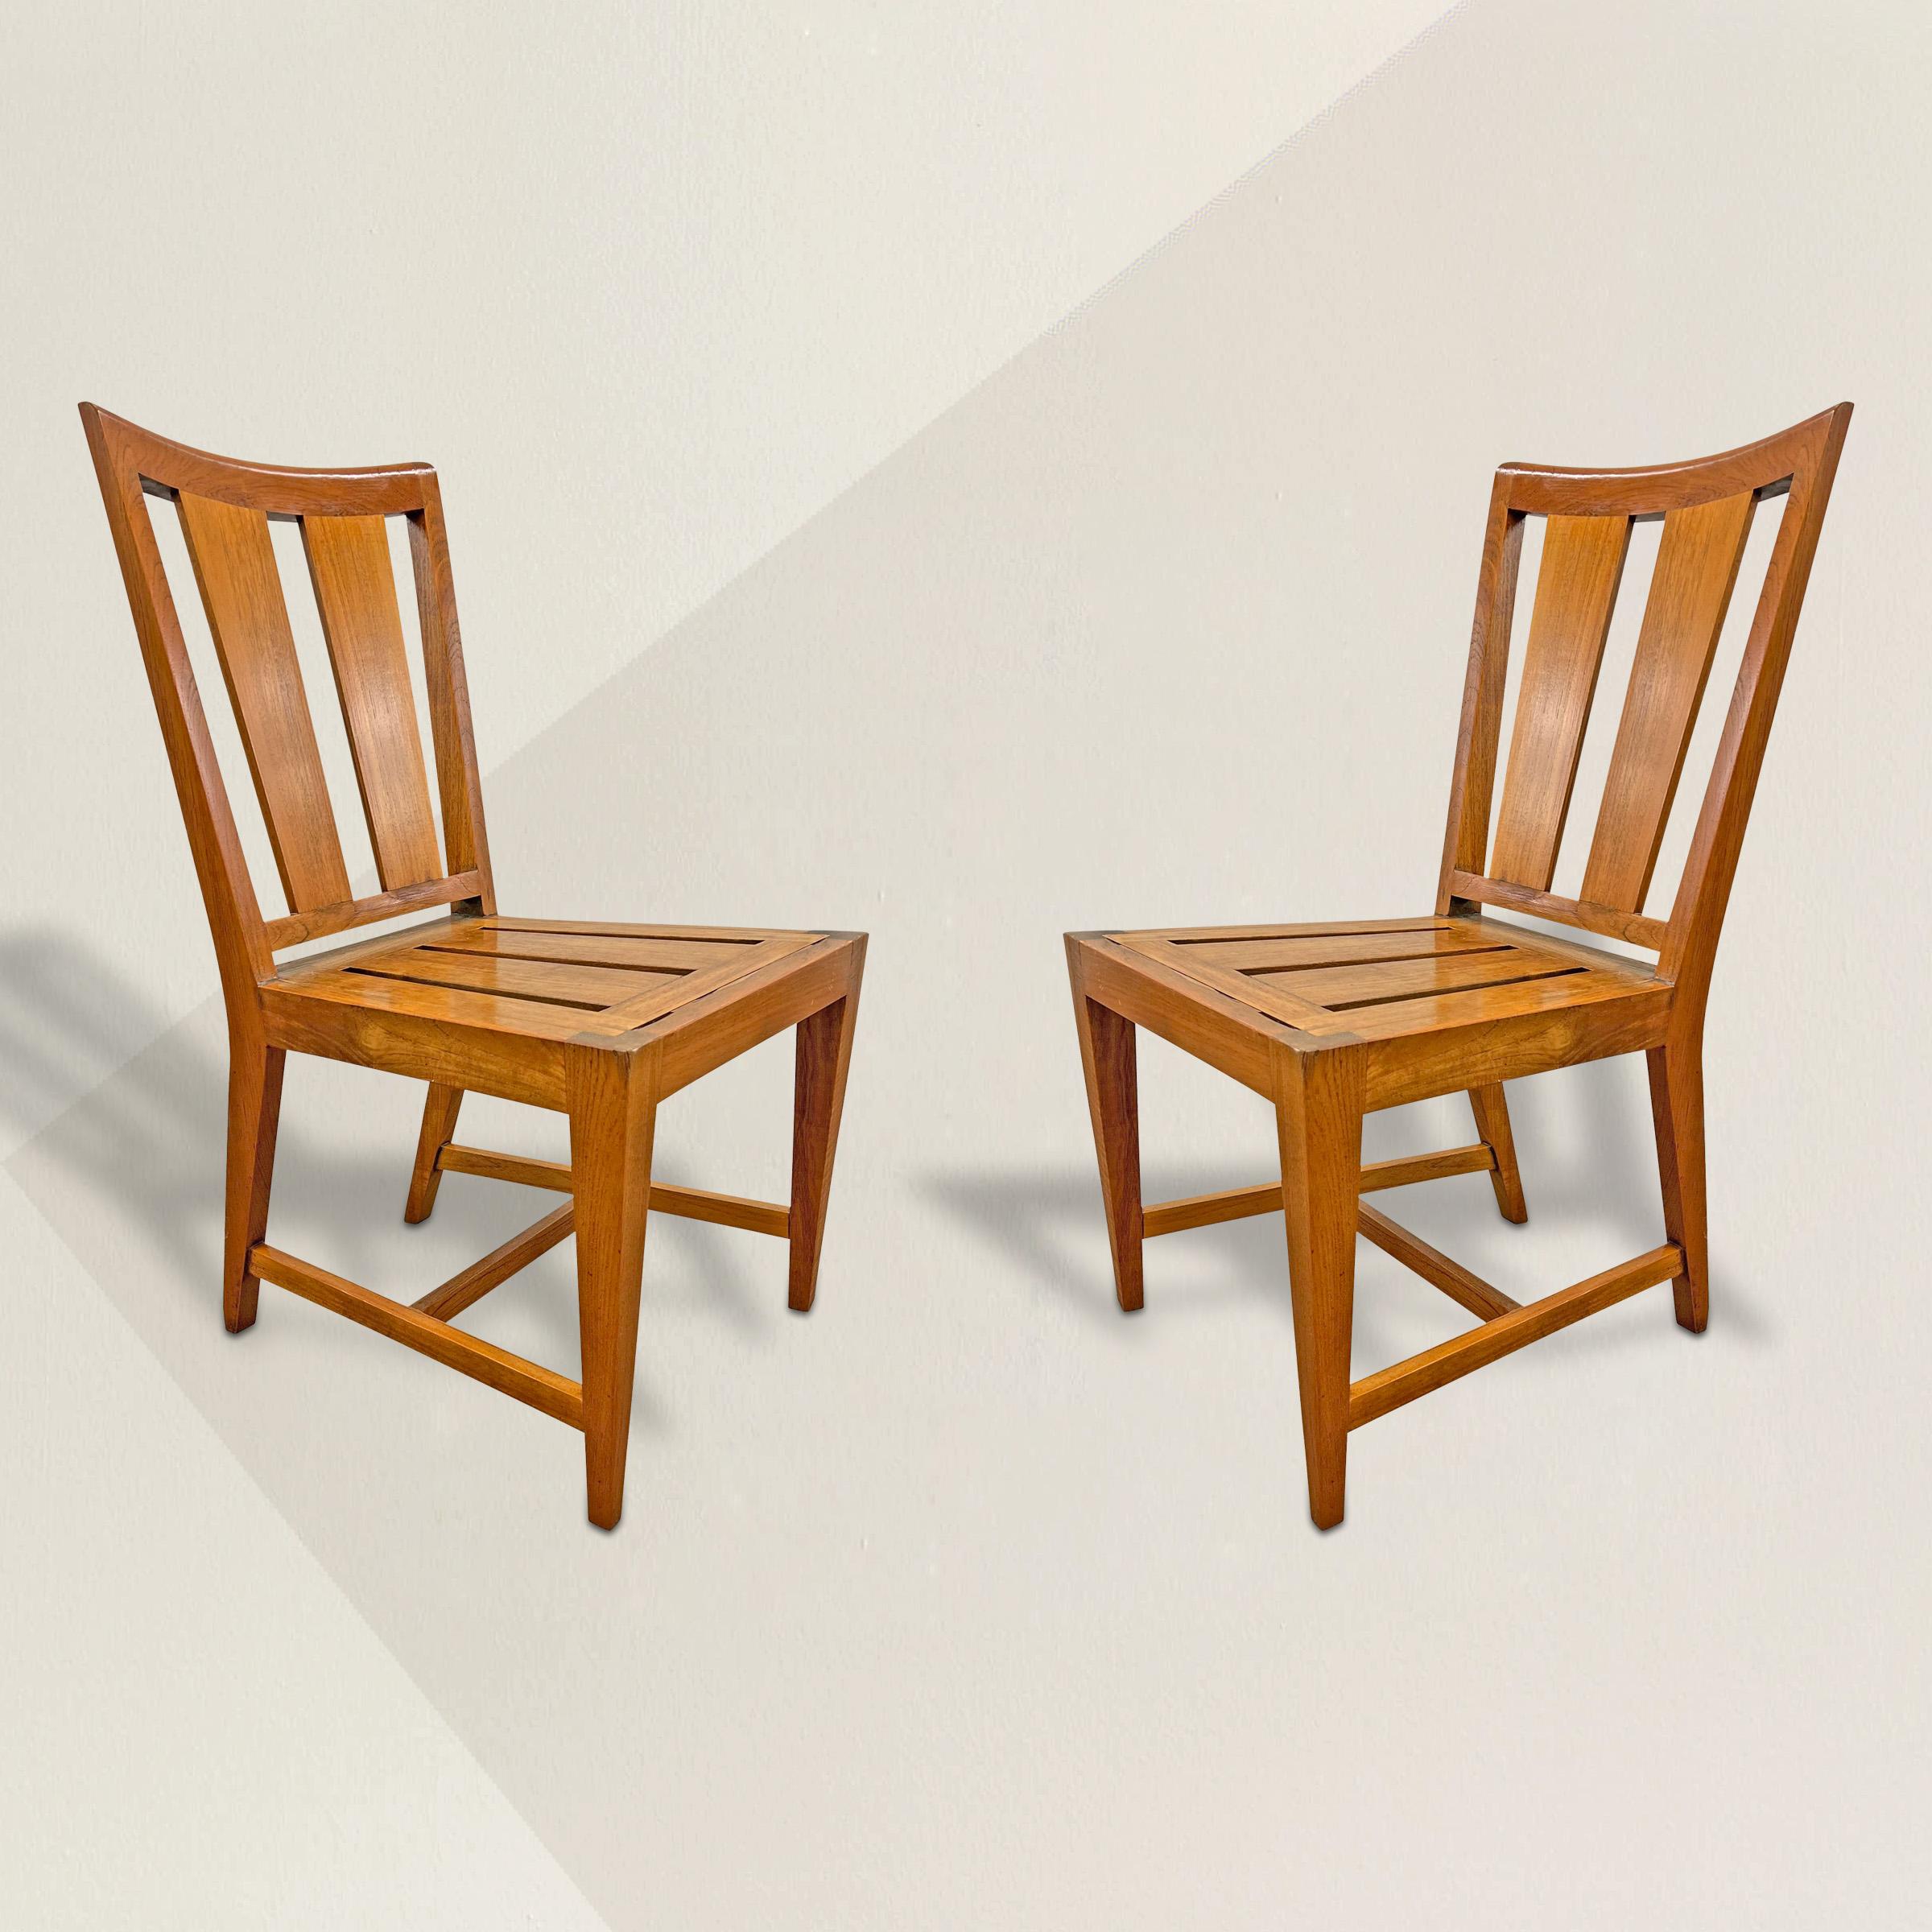 A strong and bold pair of 20th century American modernist teak wood side chairs, each with gently curved and sloping crestrails, splat backs and seats, and square tapered legs. Perfect at your breakfast table, flanking your entry console, or against